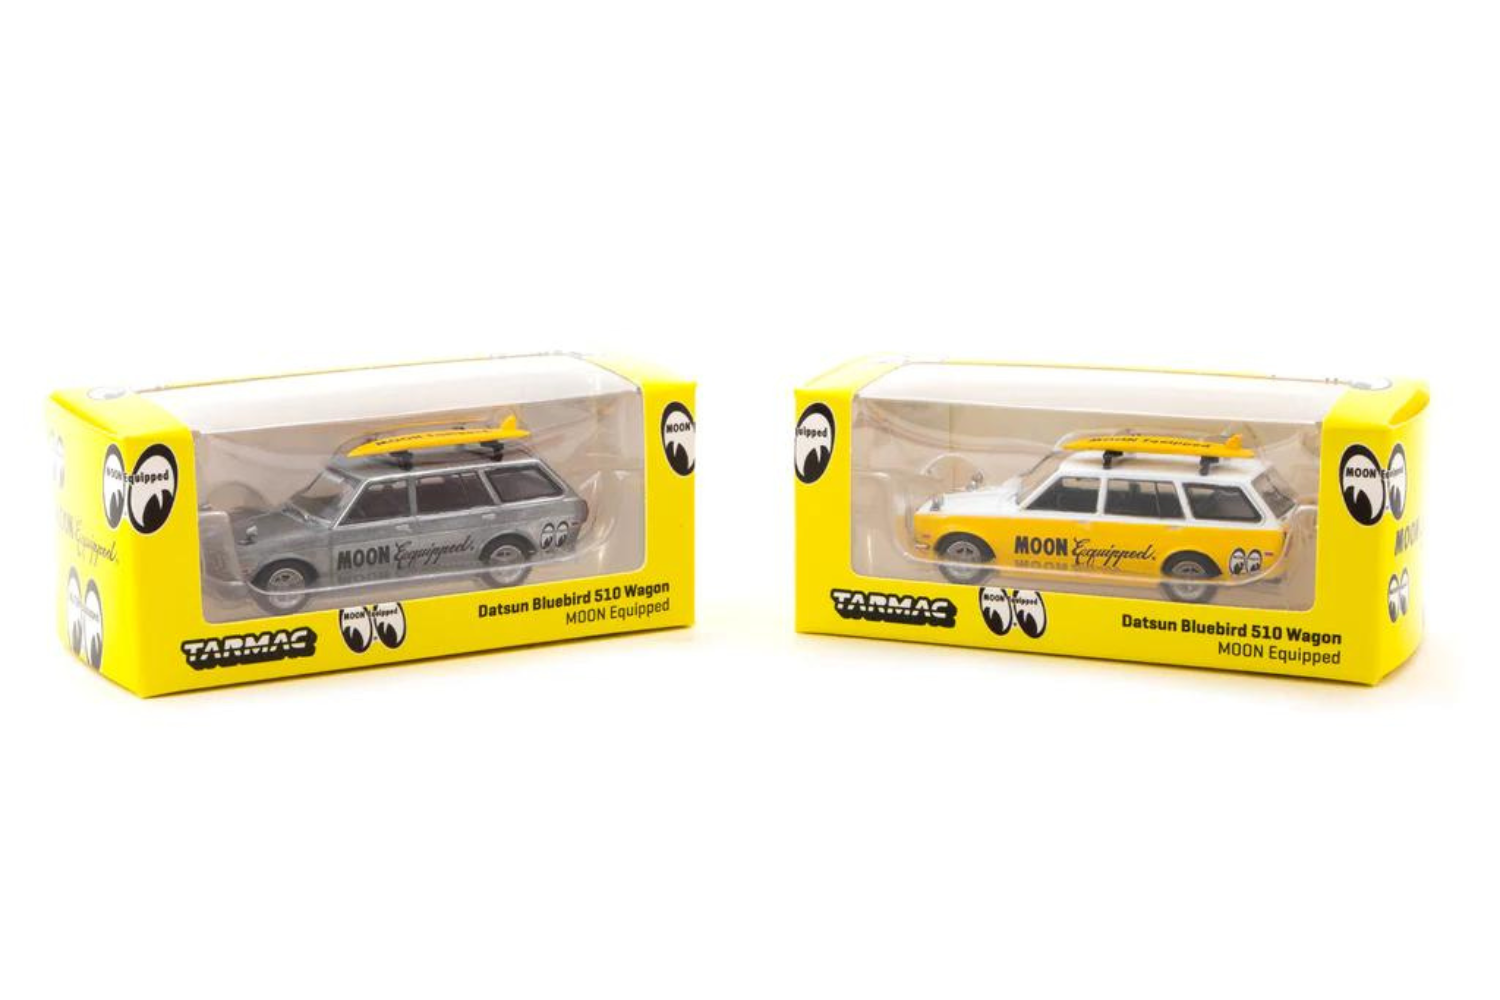 Tarmac Works Datsun Bluebird 510 Wagon Moon Equipped - GLOBAL64 - Toy Space Diecast Online Store Singapore